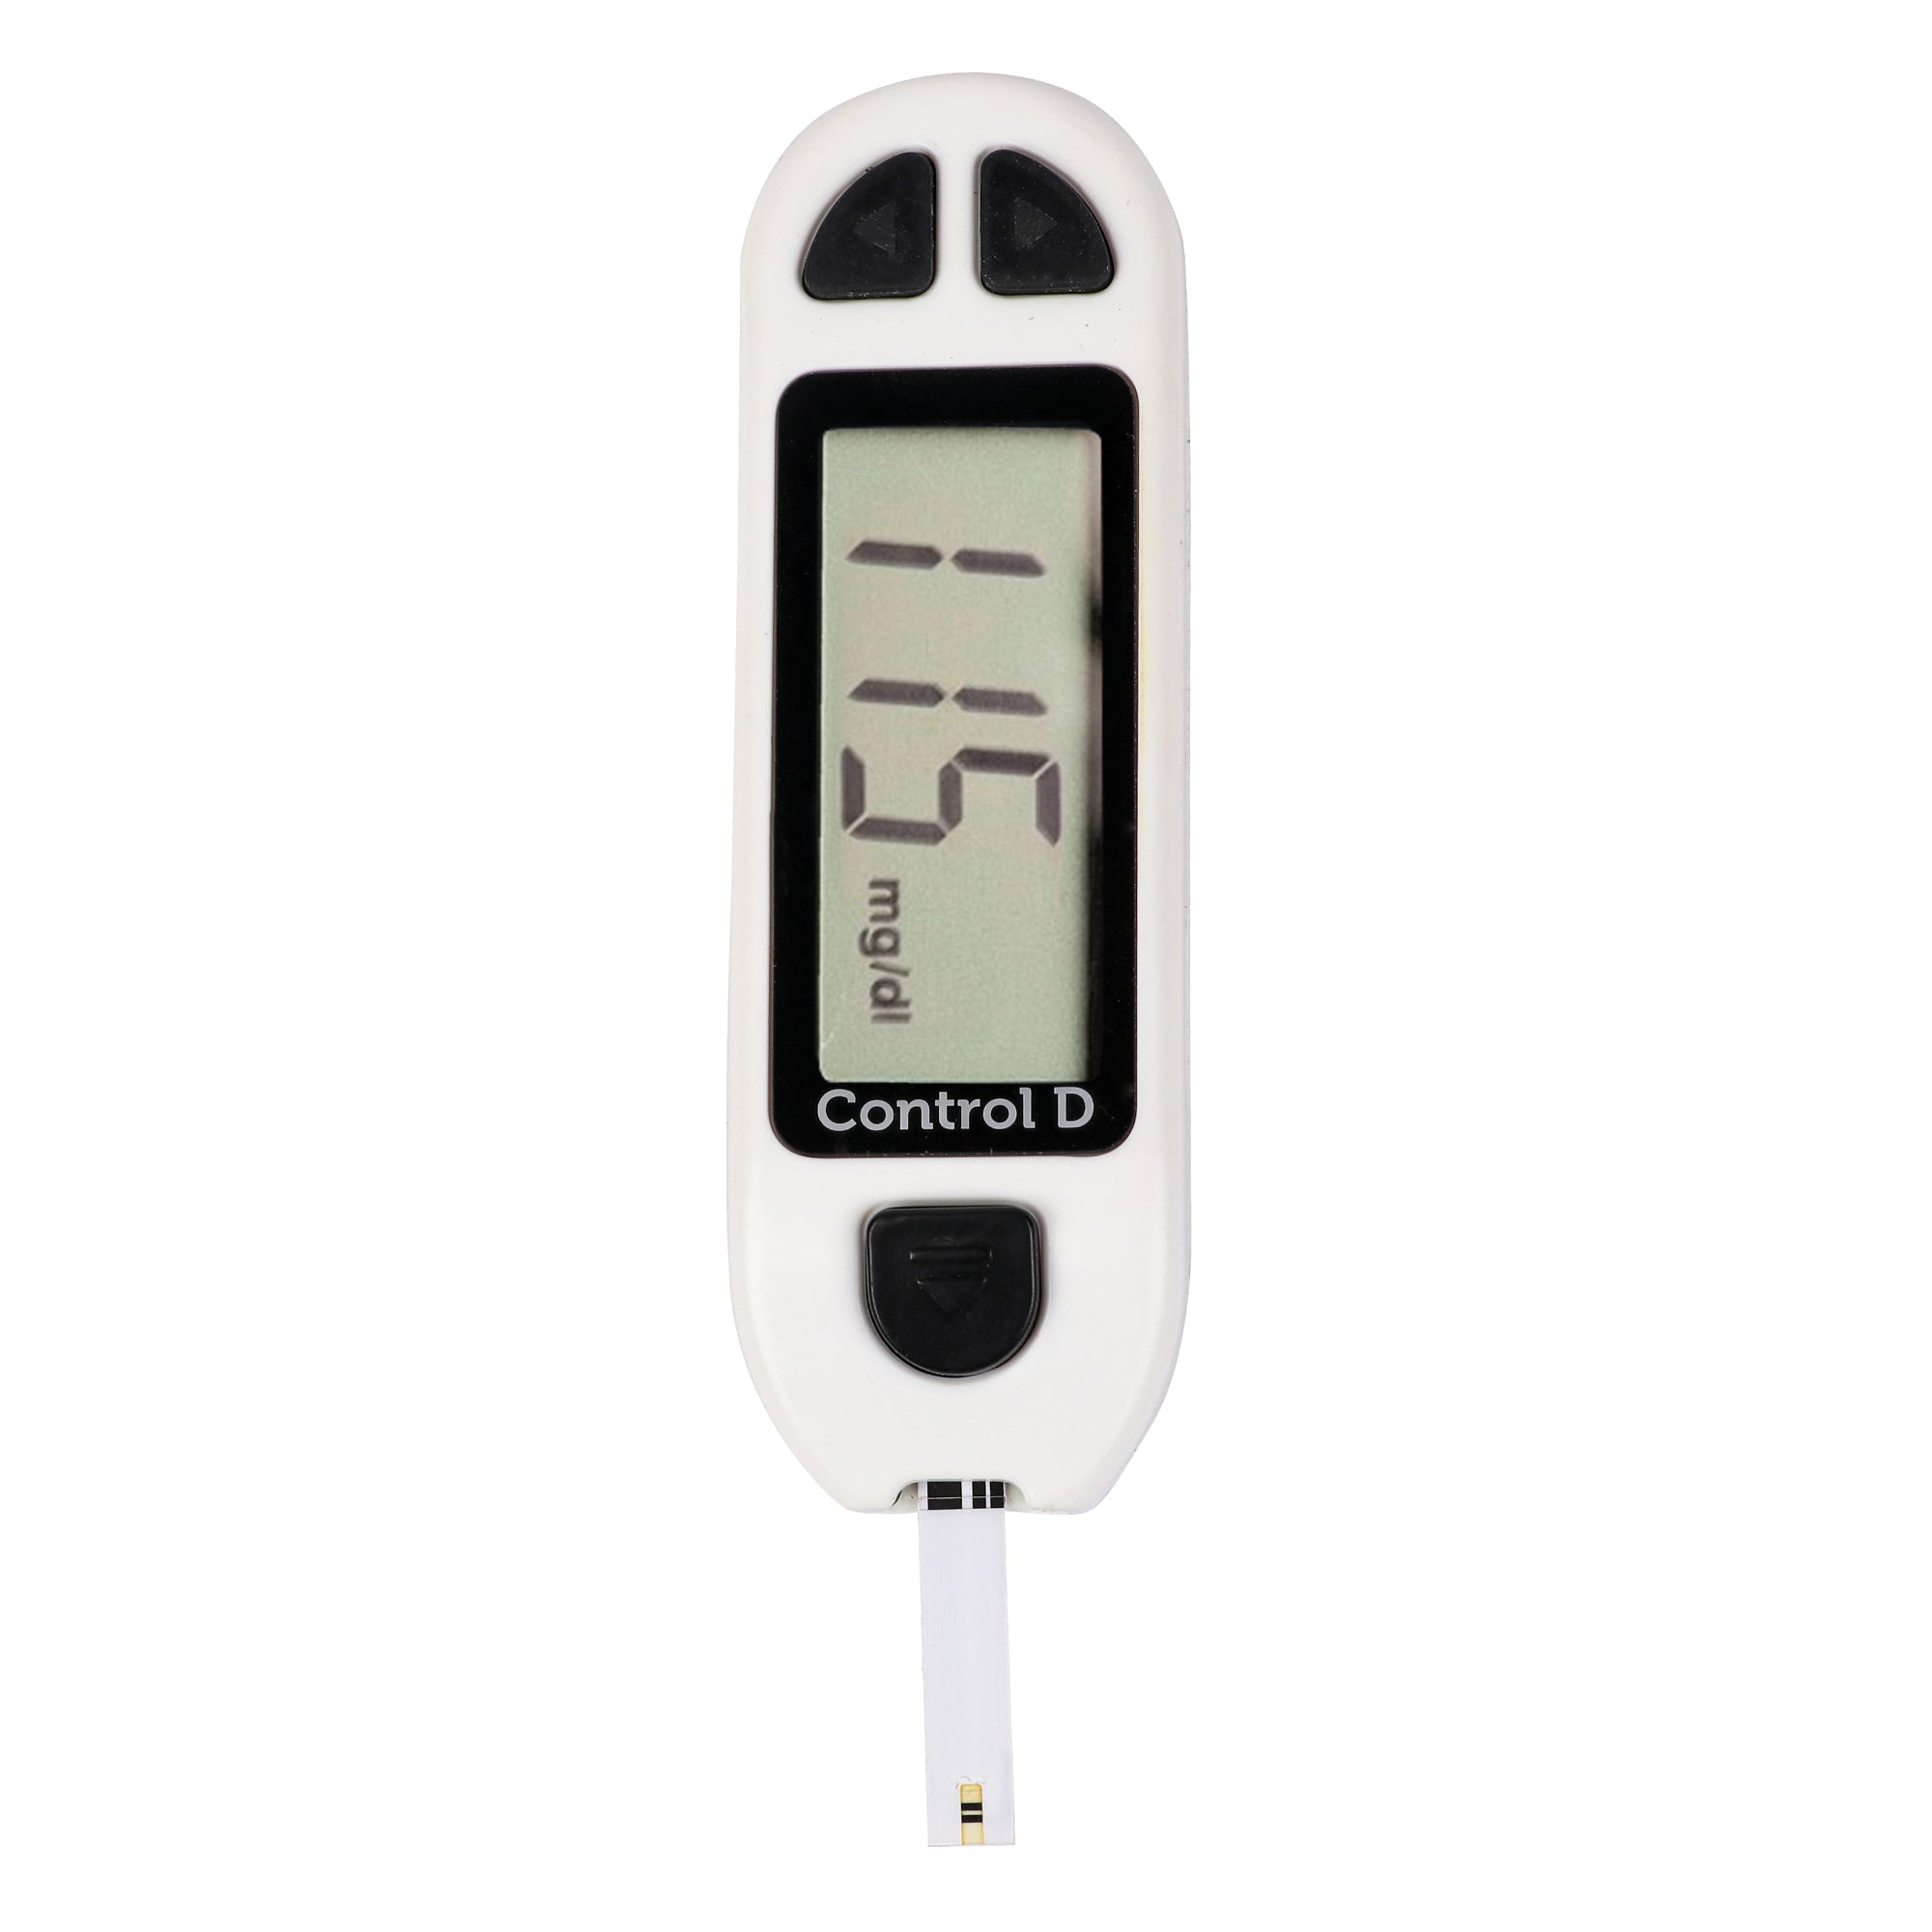 Control D White Meter Kit with 10 Strips, Lancets